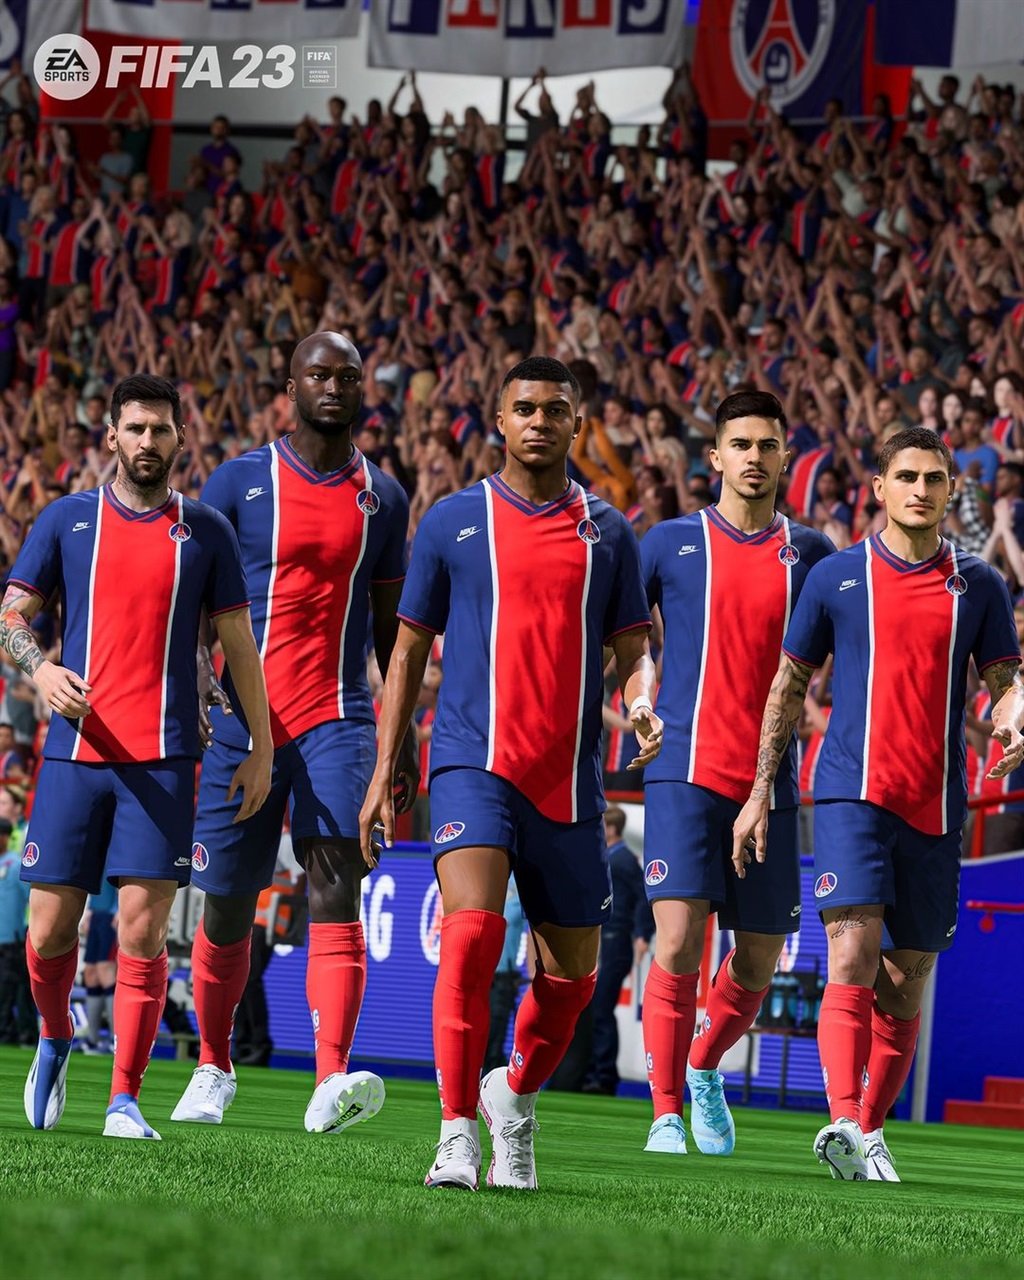 Current PSG players seen in a throwback kit on FUT 23.